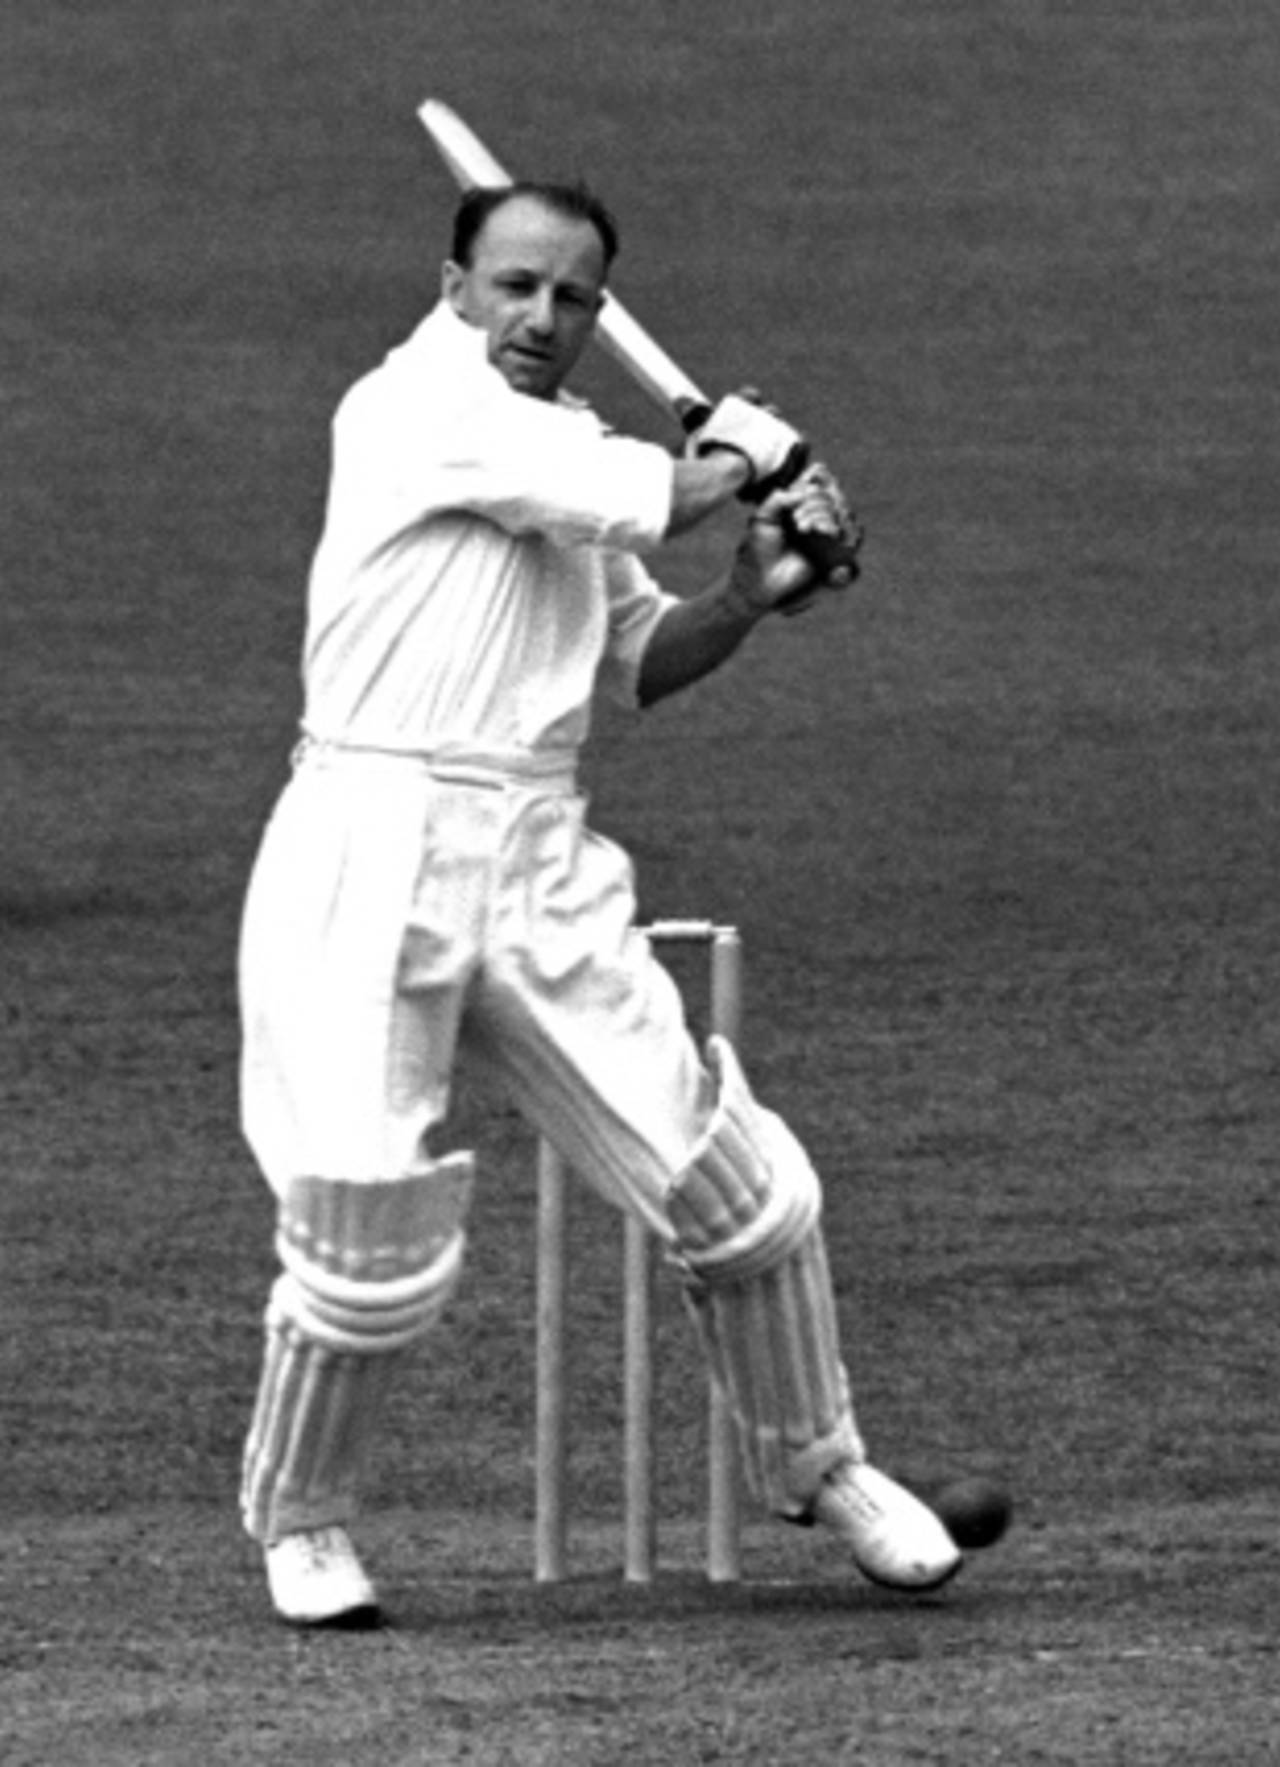 Don Bradman plays and misses during his innings of 138, England v Australia, 1st Test, Trent Bridge, 2nd day, June 11, 1948